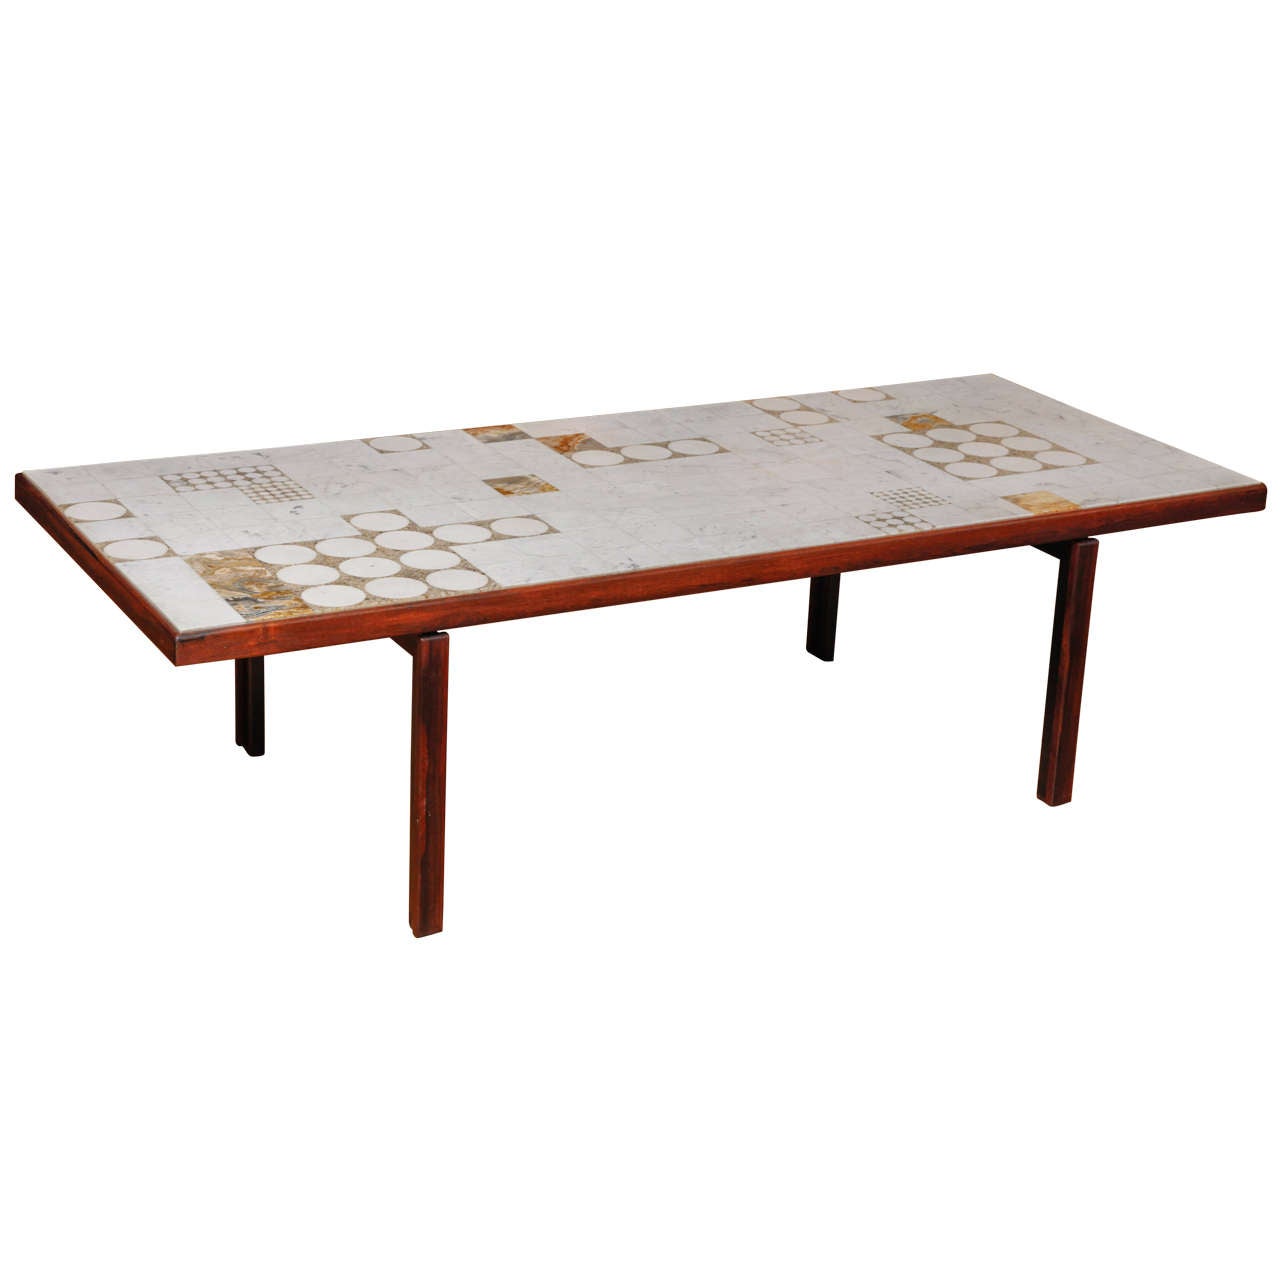 Marble marquetery coffee table